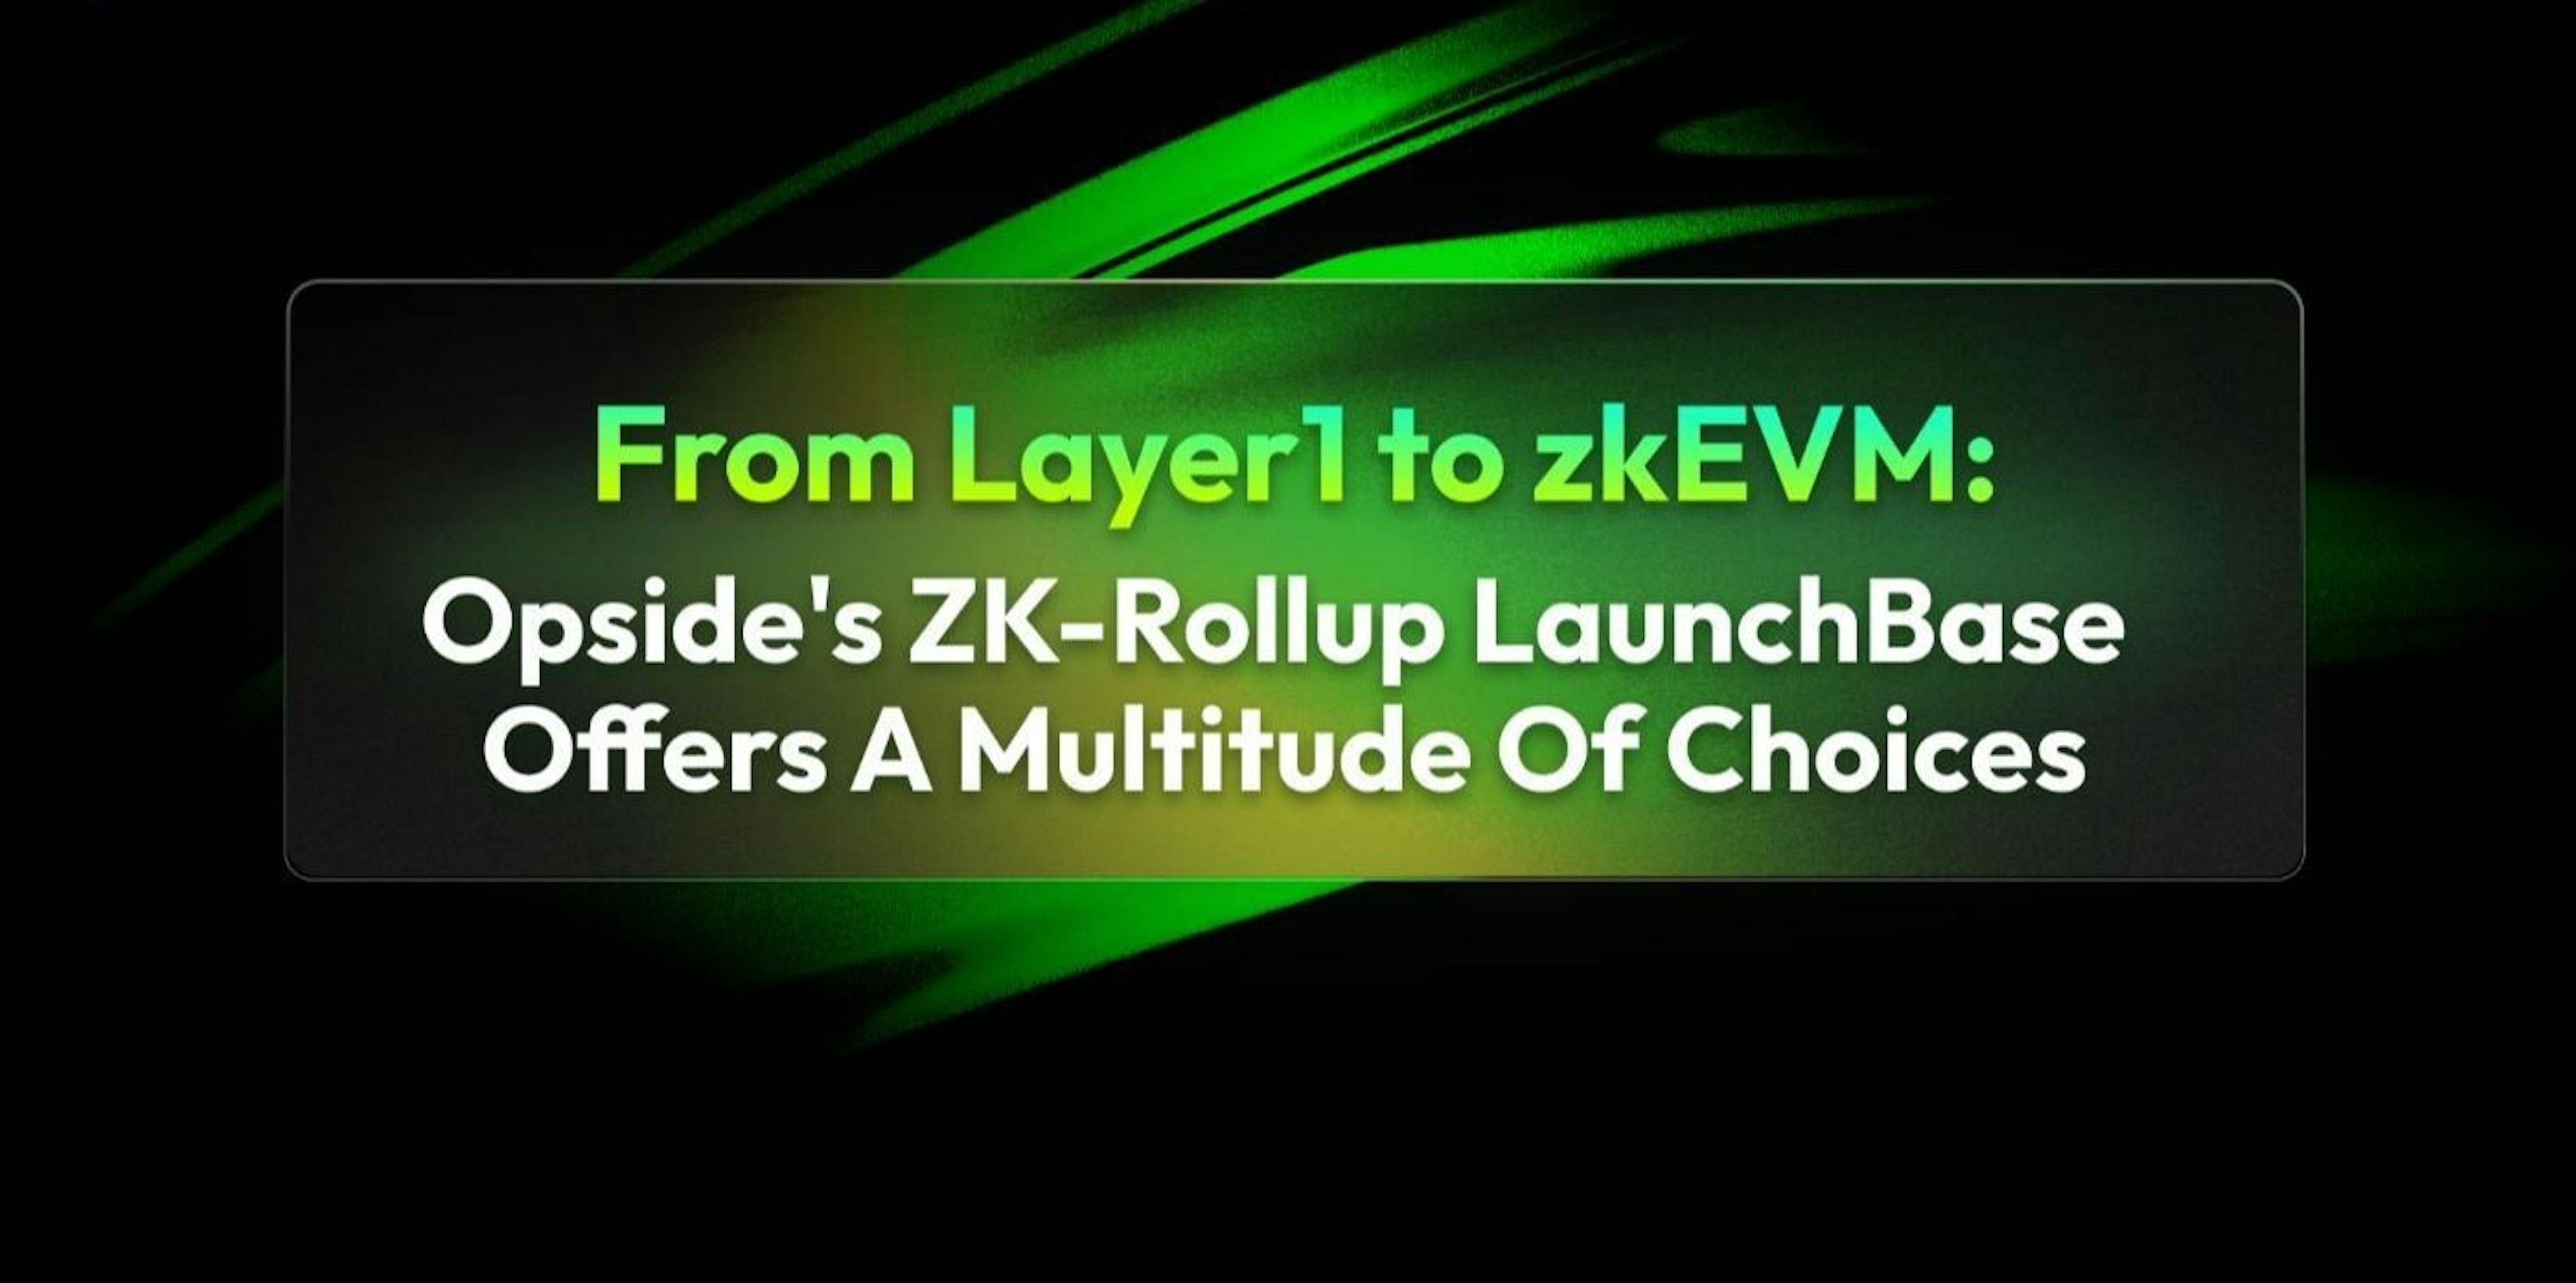 featured image - Layer1 から zkEVM まで: Opside の ZK-Rollup LaunchBase は豊富な選択肢を提供します